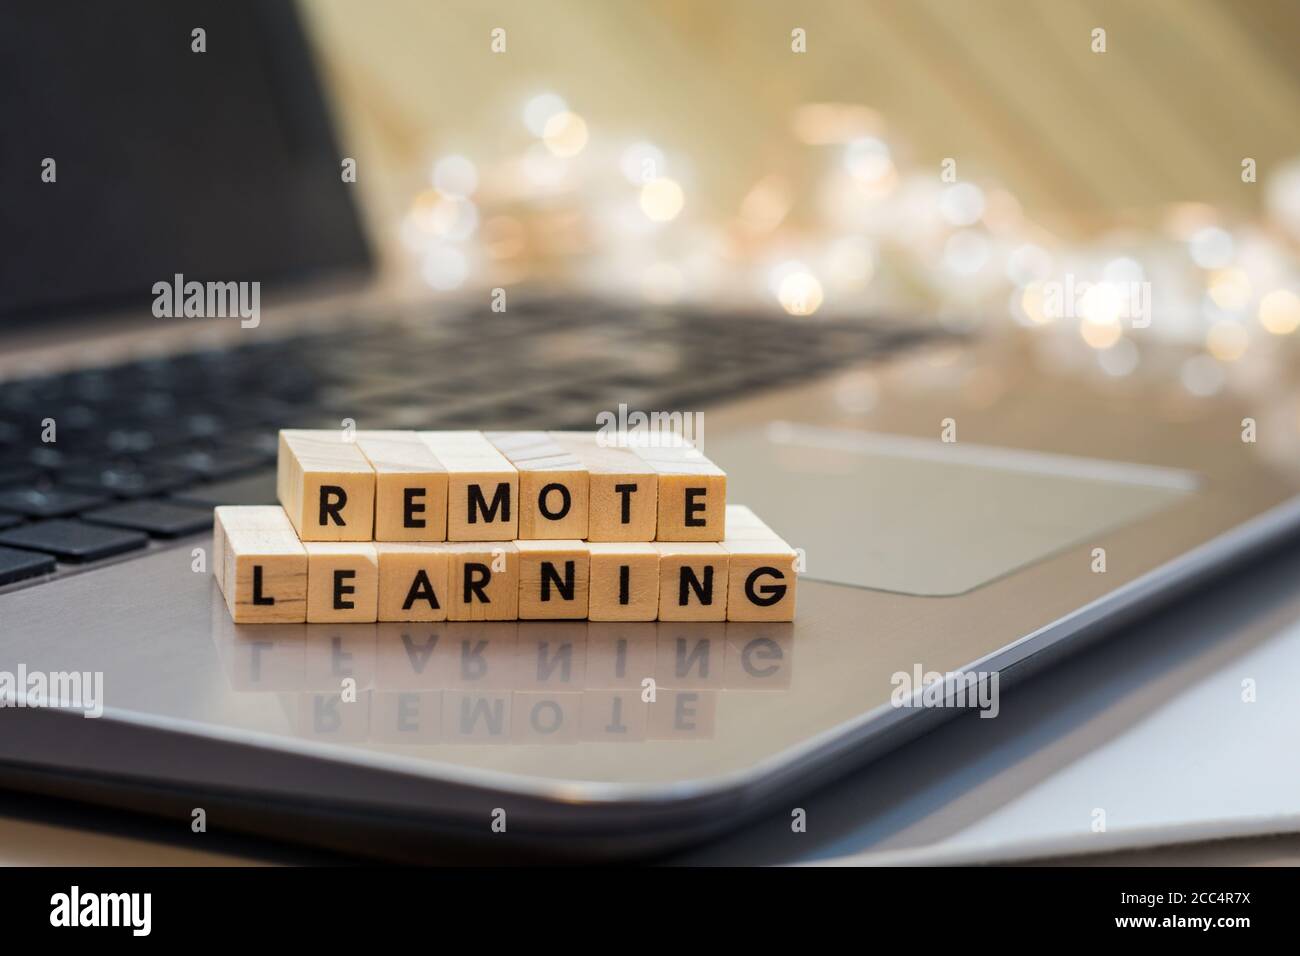 REMOTE LEARNING virtual learning concept with wood block letters on laptop.  Distance learning, remote learning, virtual learning. Stock Photo